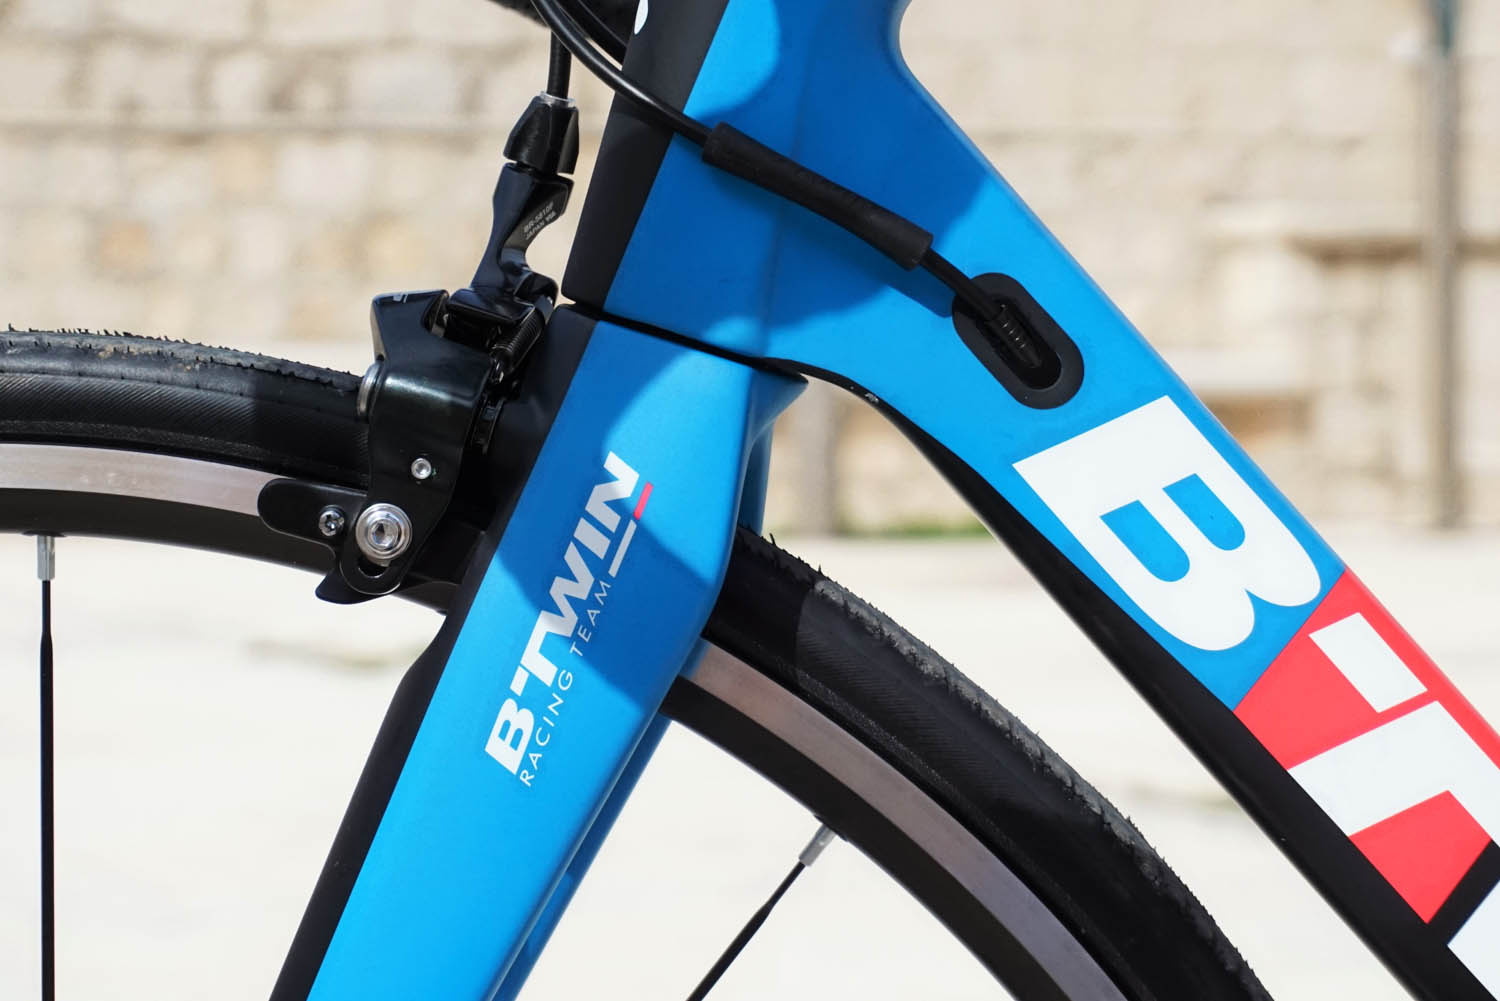 btwin 900 cf review